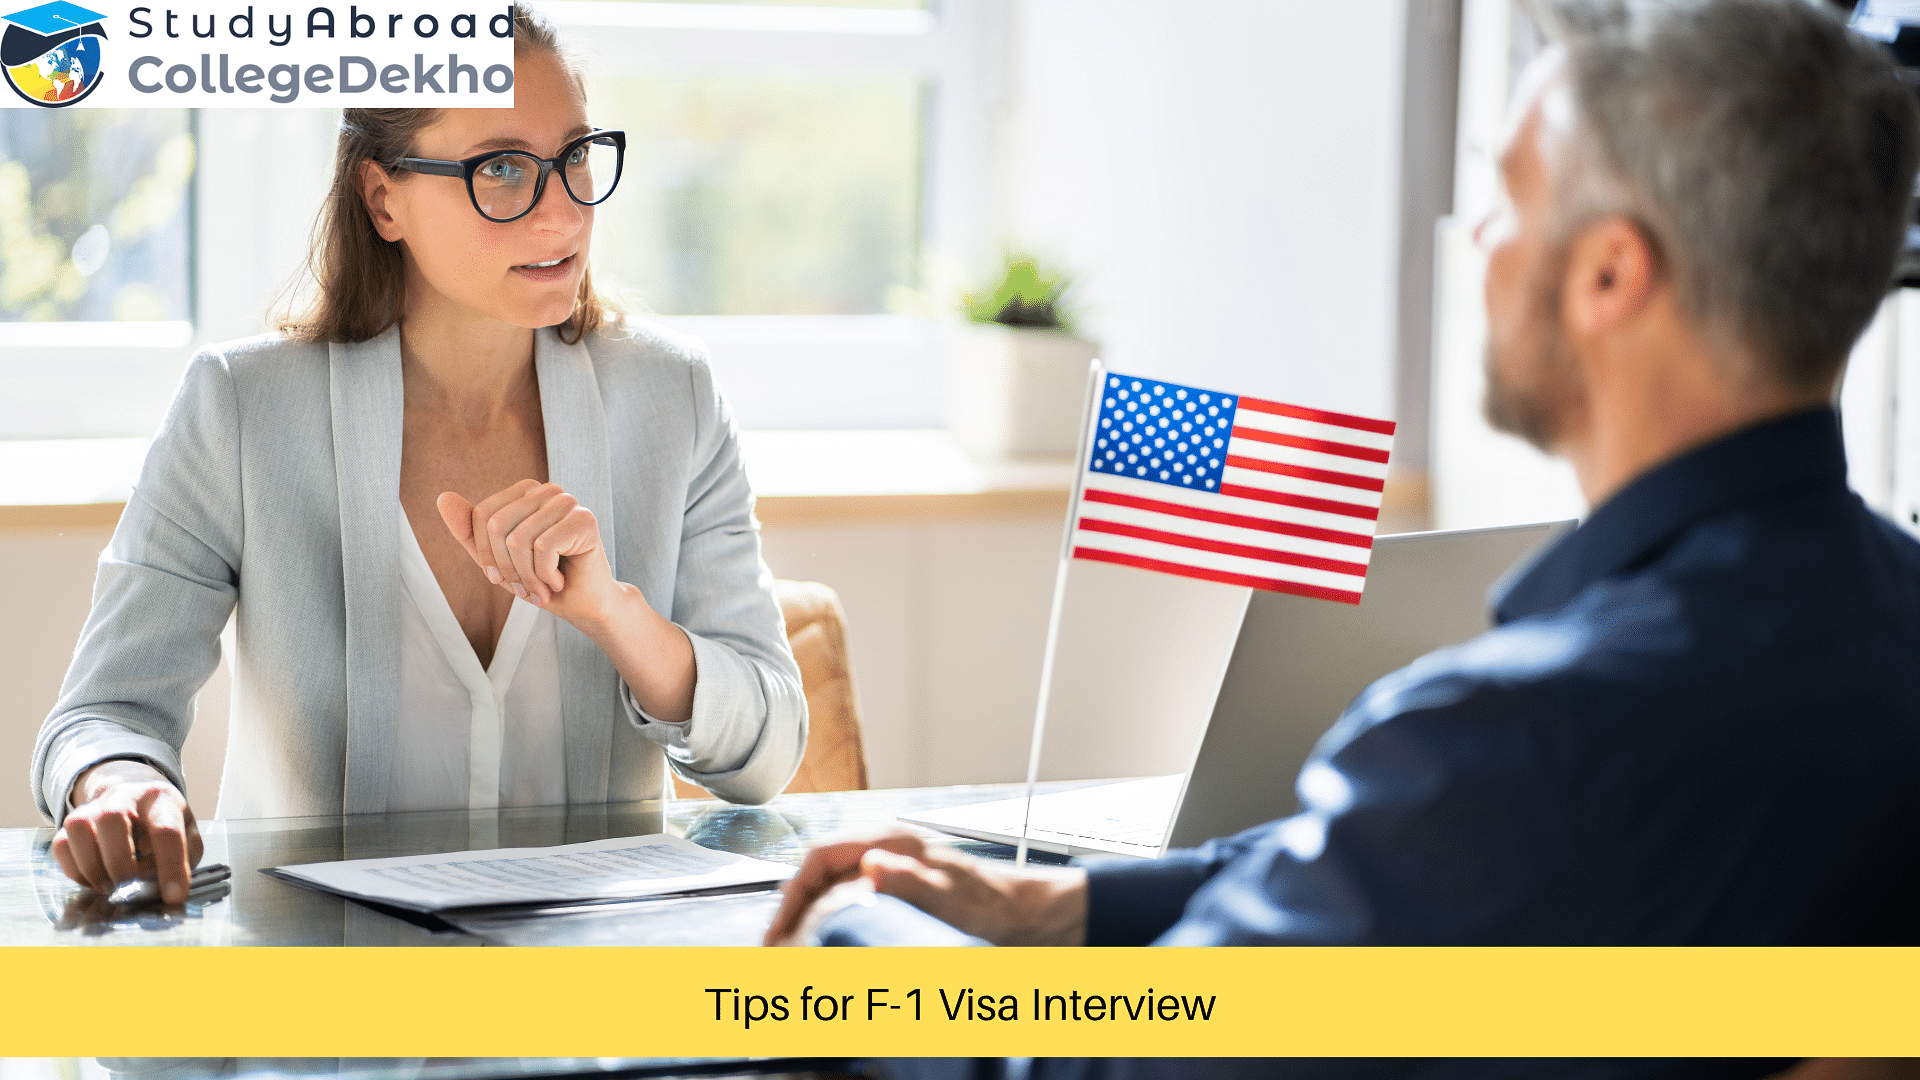 Tips for a Successful F-1 Visa Interview